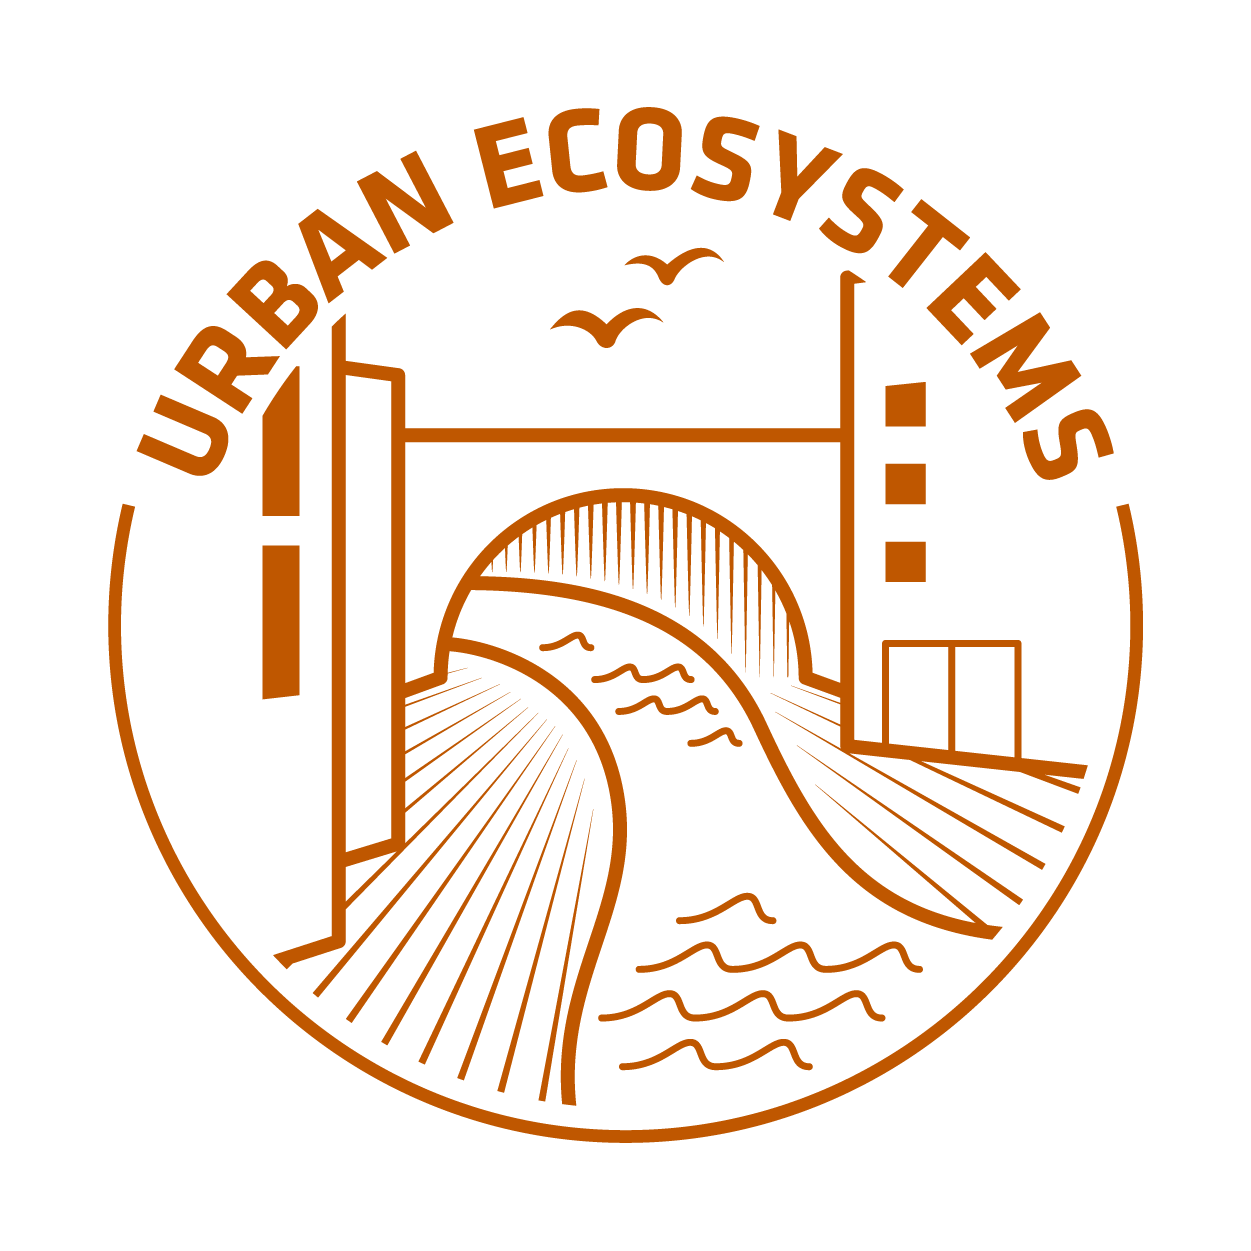 ☼ UT Austin FRI Stream dedicated to research, education and the preservation of urban ecosystems ☼